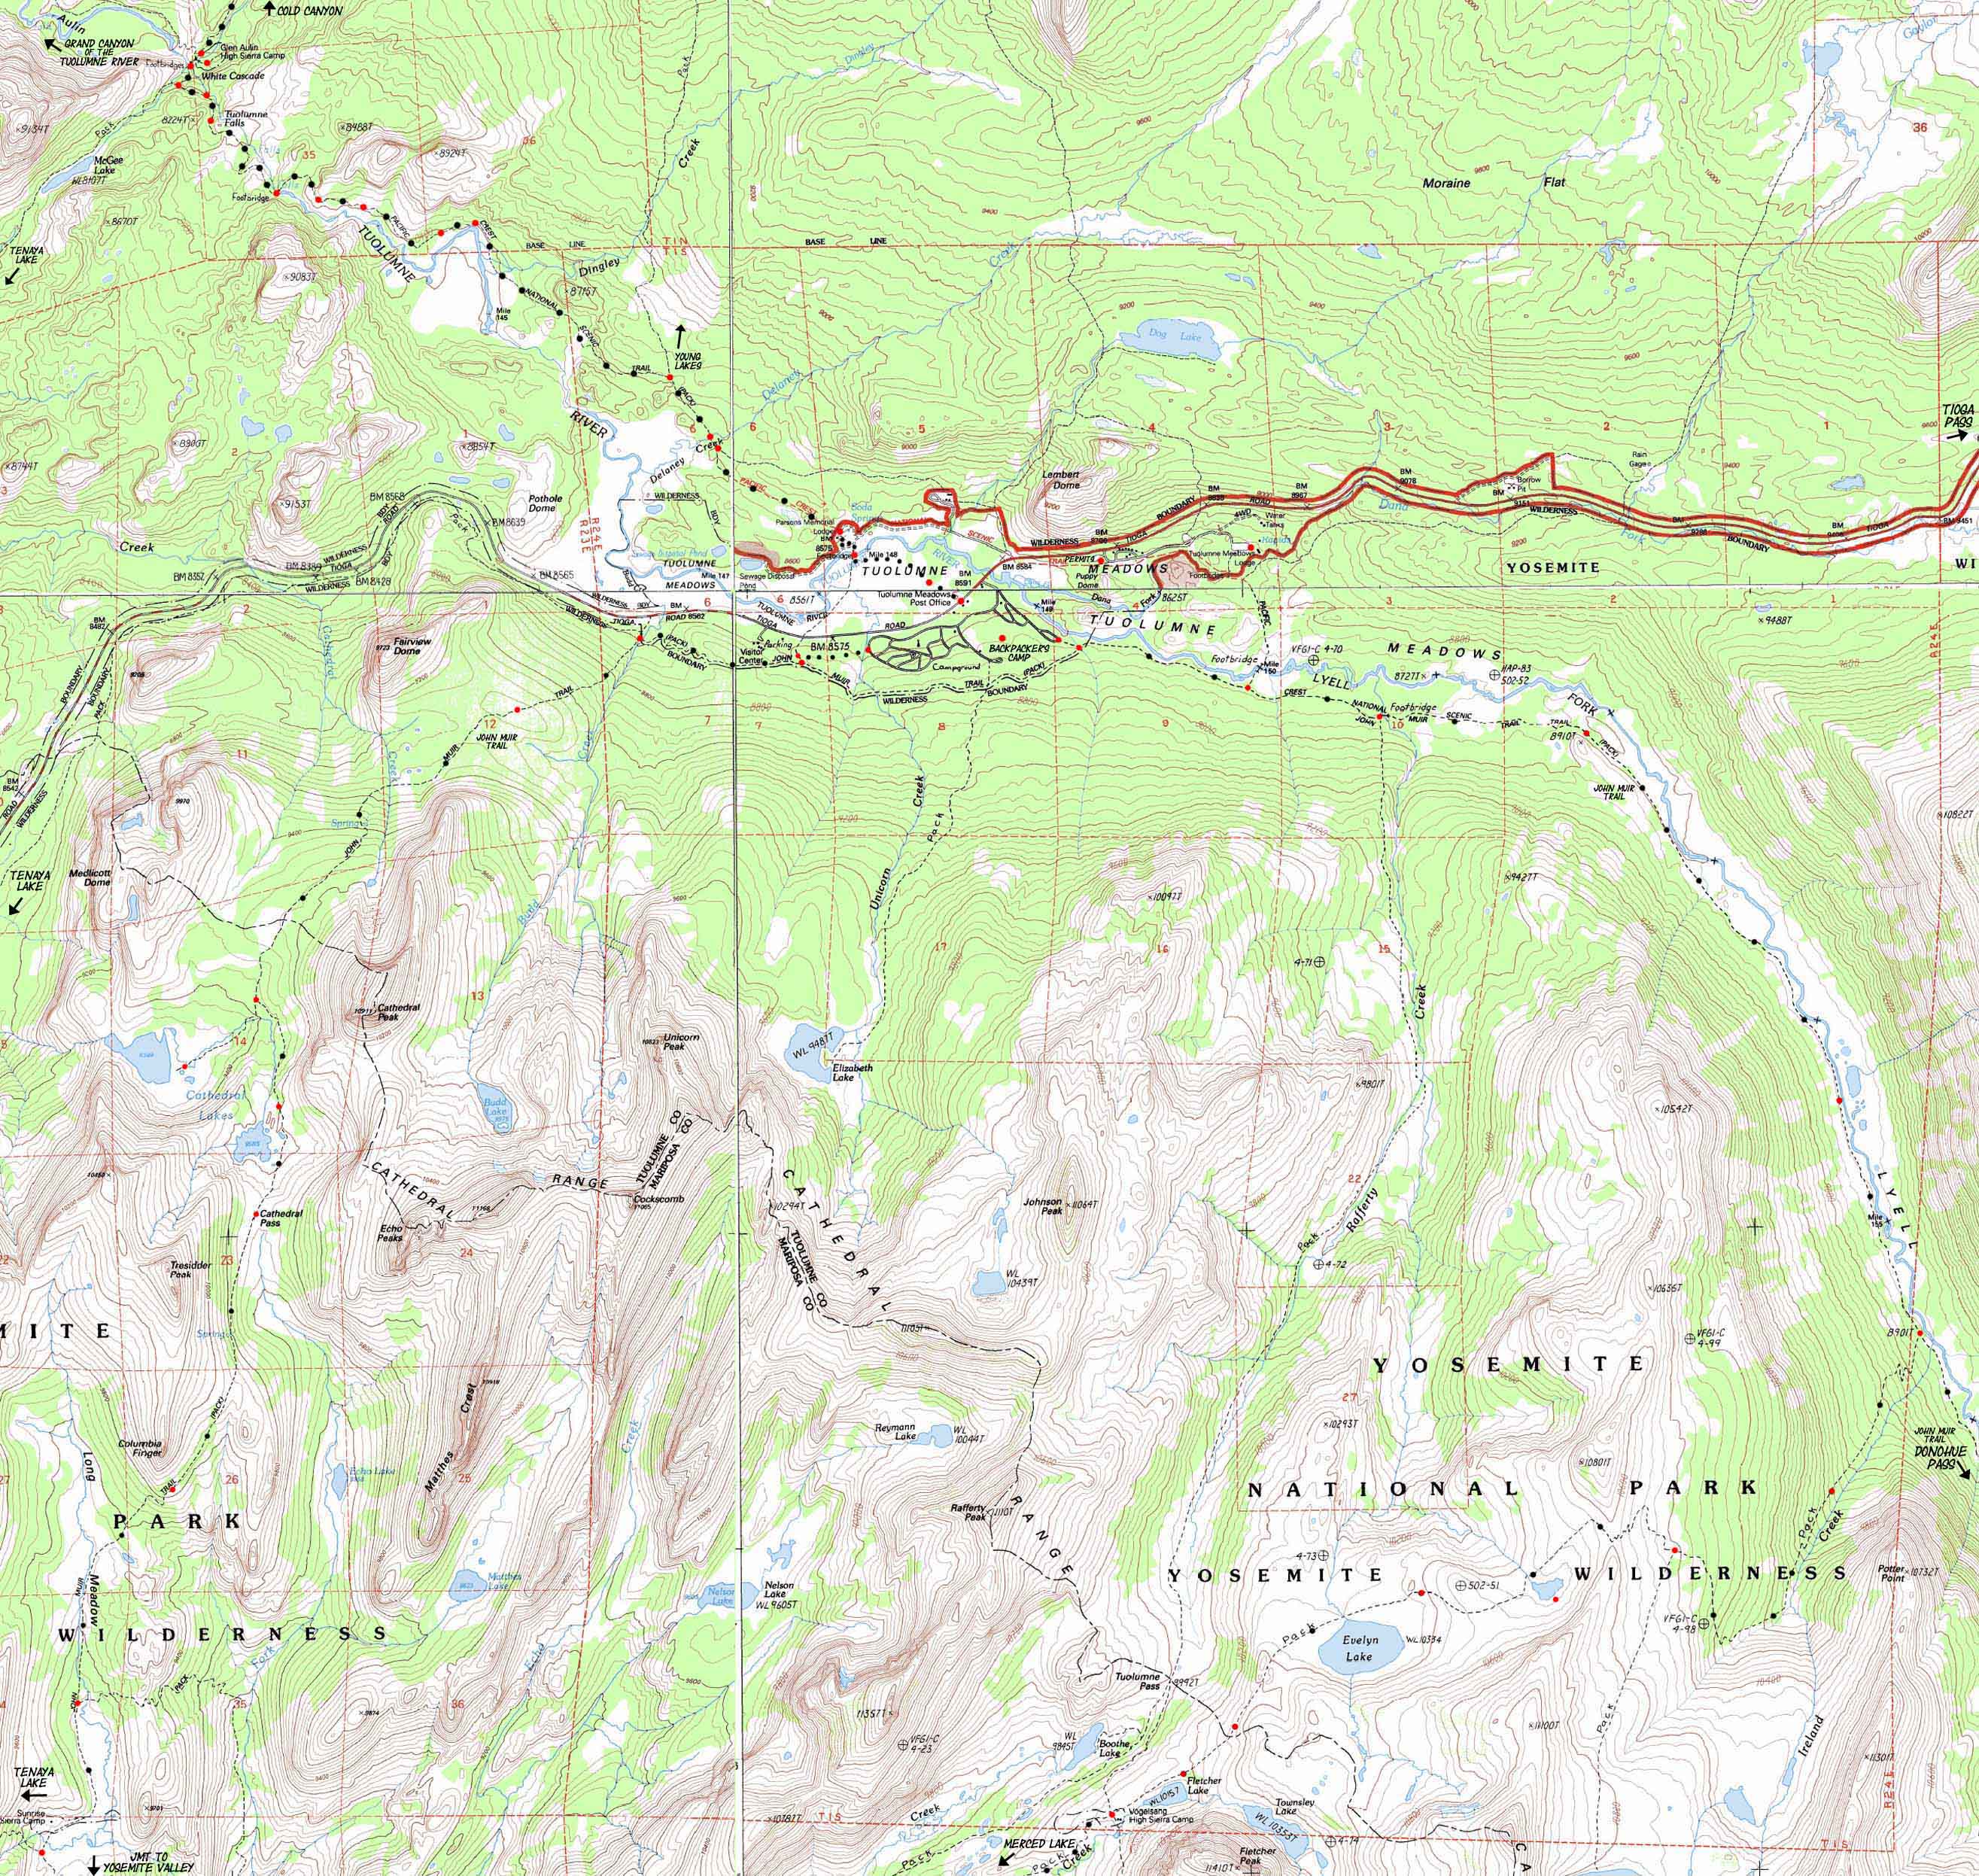 Tuolumne Meadow Region Hiking Map. Pacific Crest Trail and Tahoe to Yosemite Trail North. John Muir Trail to Yosemite Valley and down Lyell Canyon.